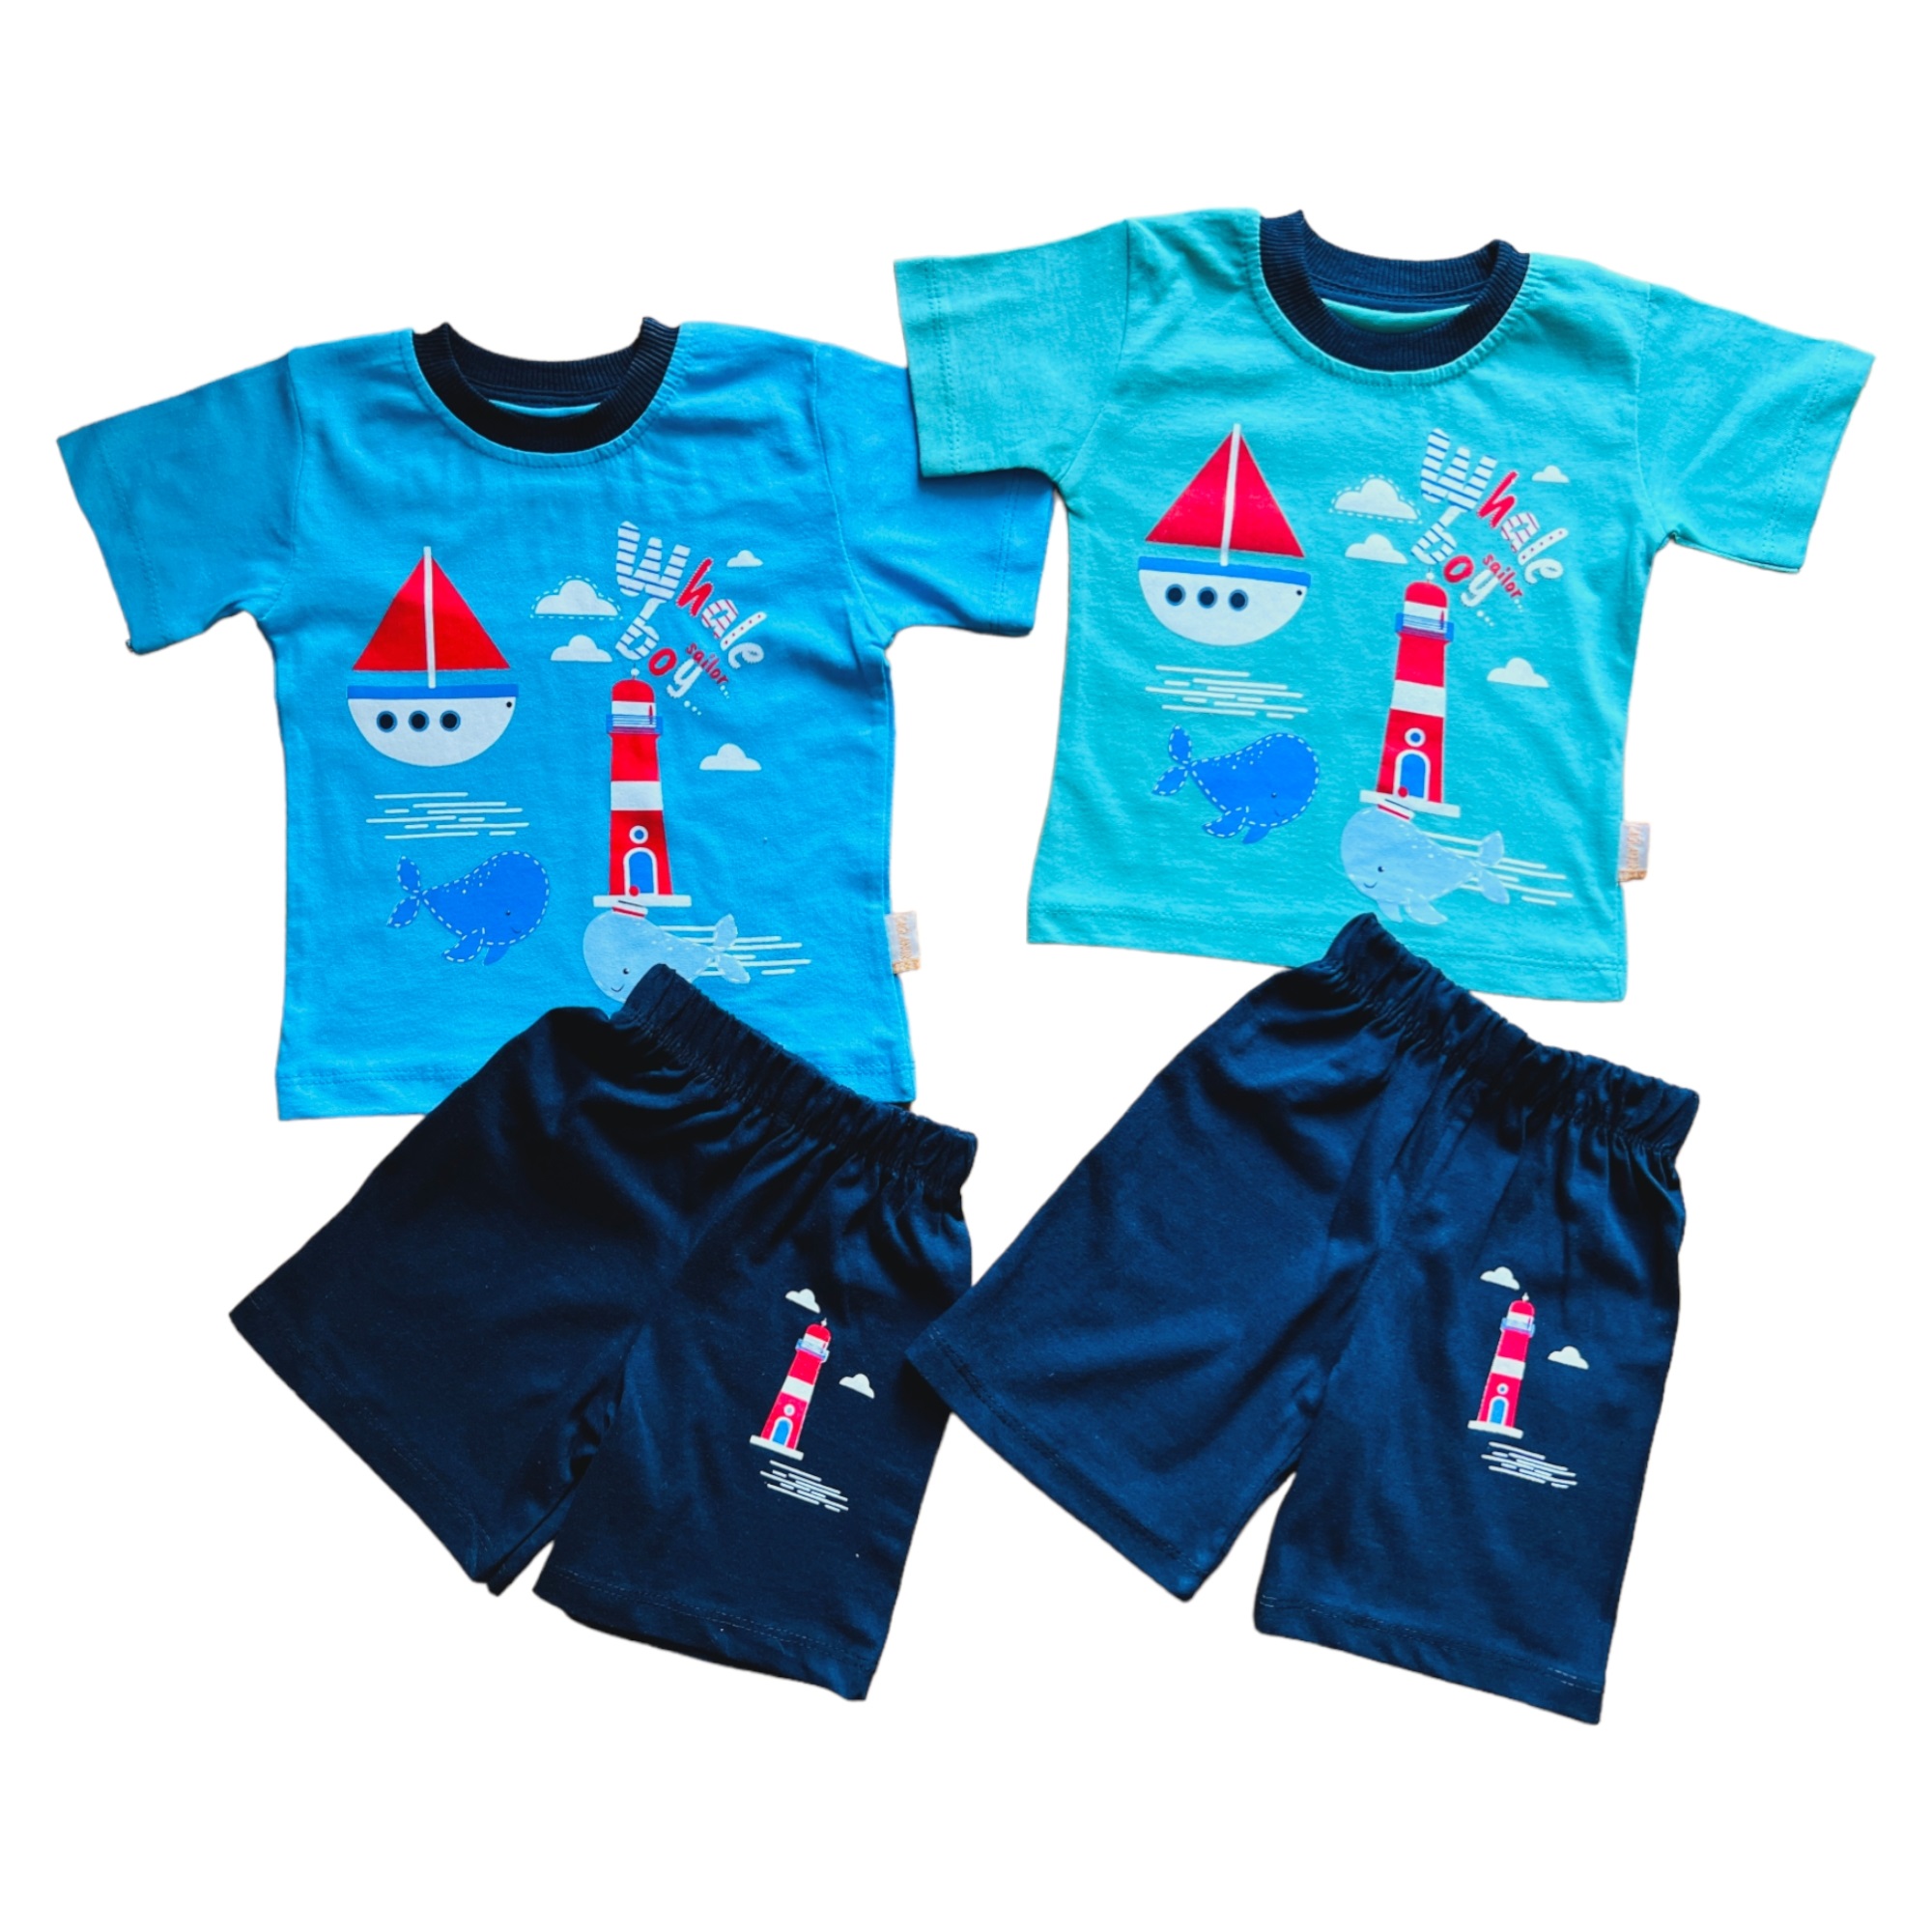 Joblot of 8x Brand New Toddler Boys 2-Pcs Set in 2 Colours - Sizes 1y-4y